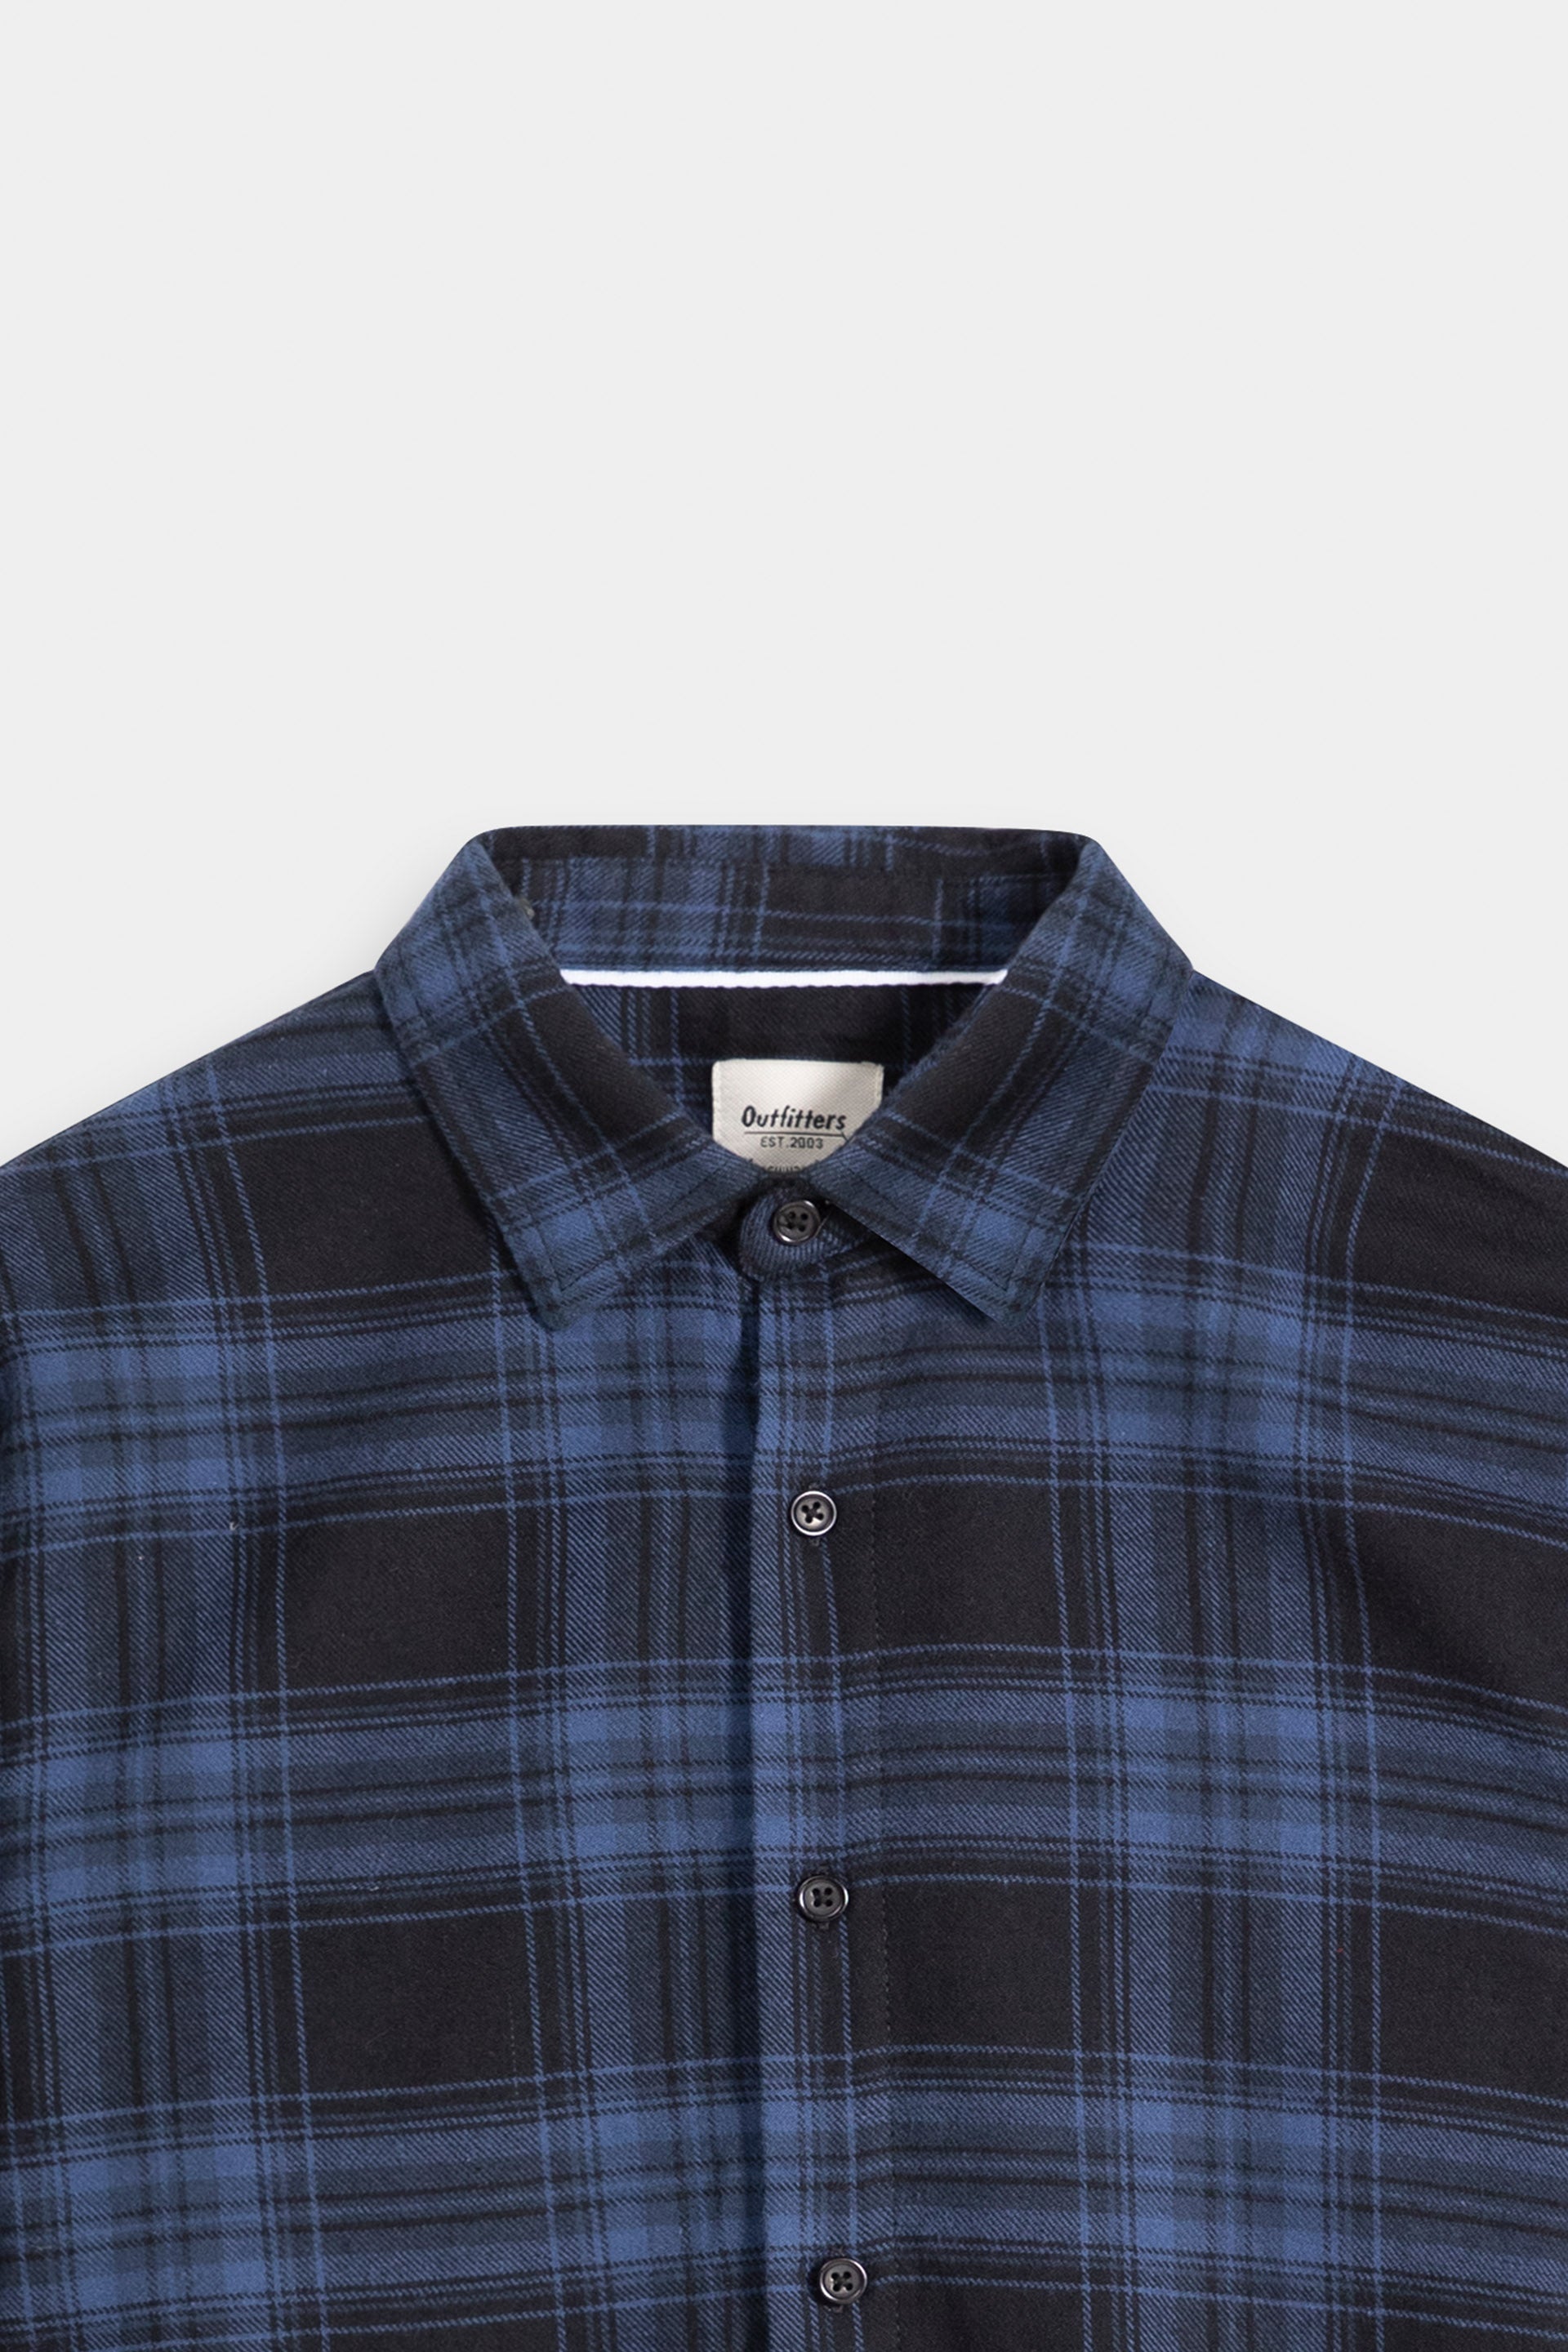 Check Shirt – Outfitters